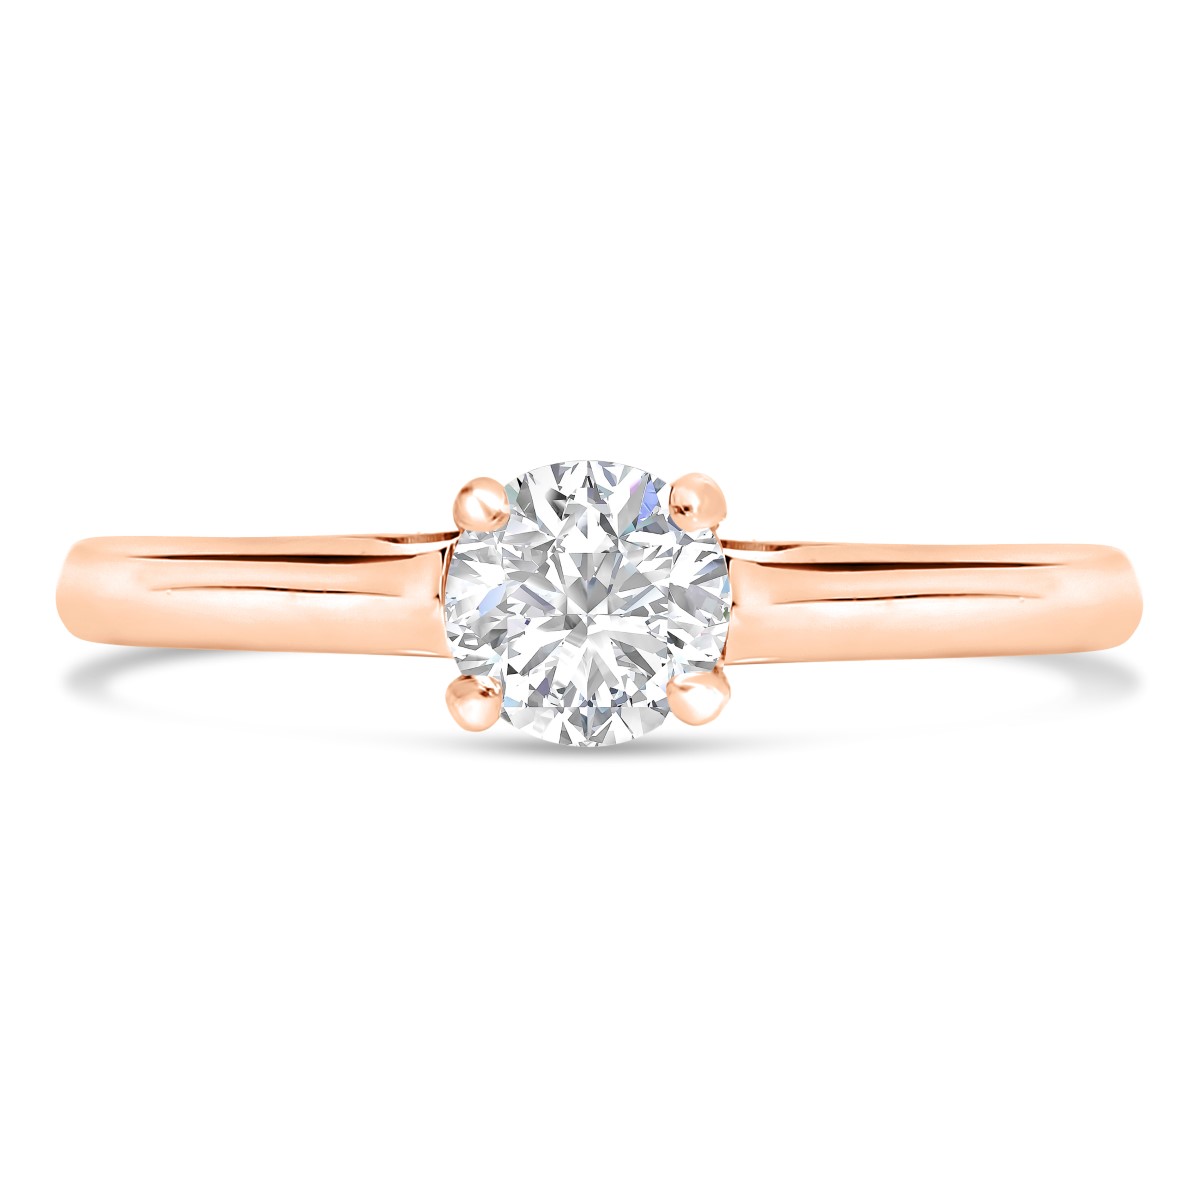 st-martin-r-solitaires-diamants-certifies-style-classique-or-rose-750-